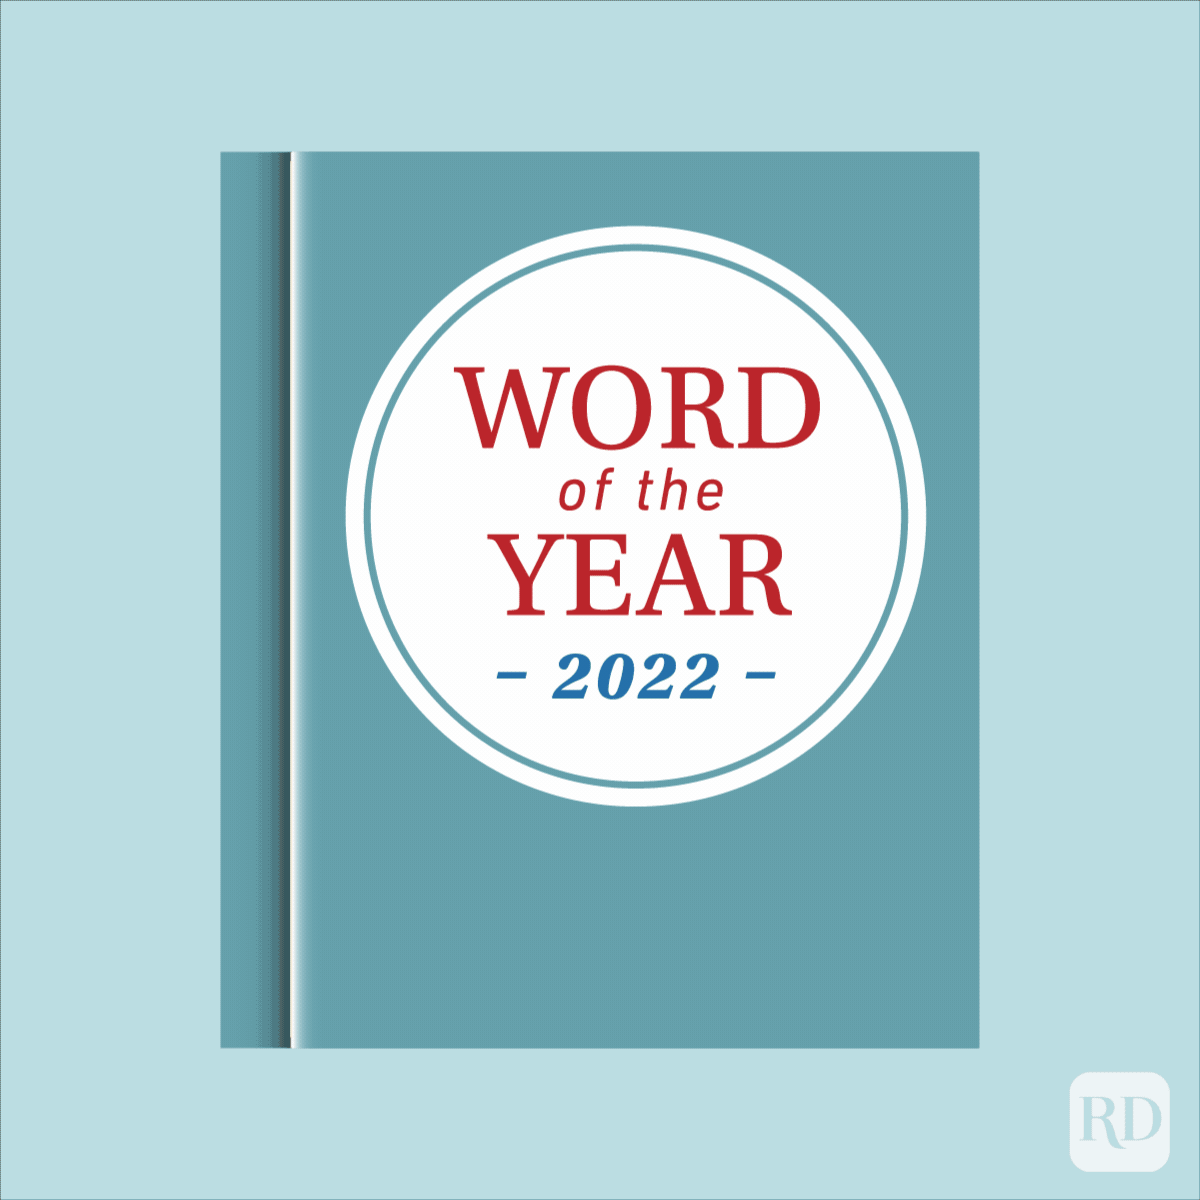 This Is Merriam-Webster's 2022 Word of the Year | Reader's Digest